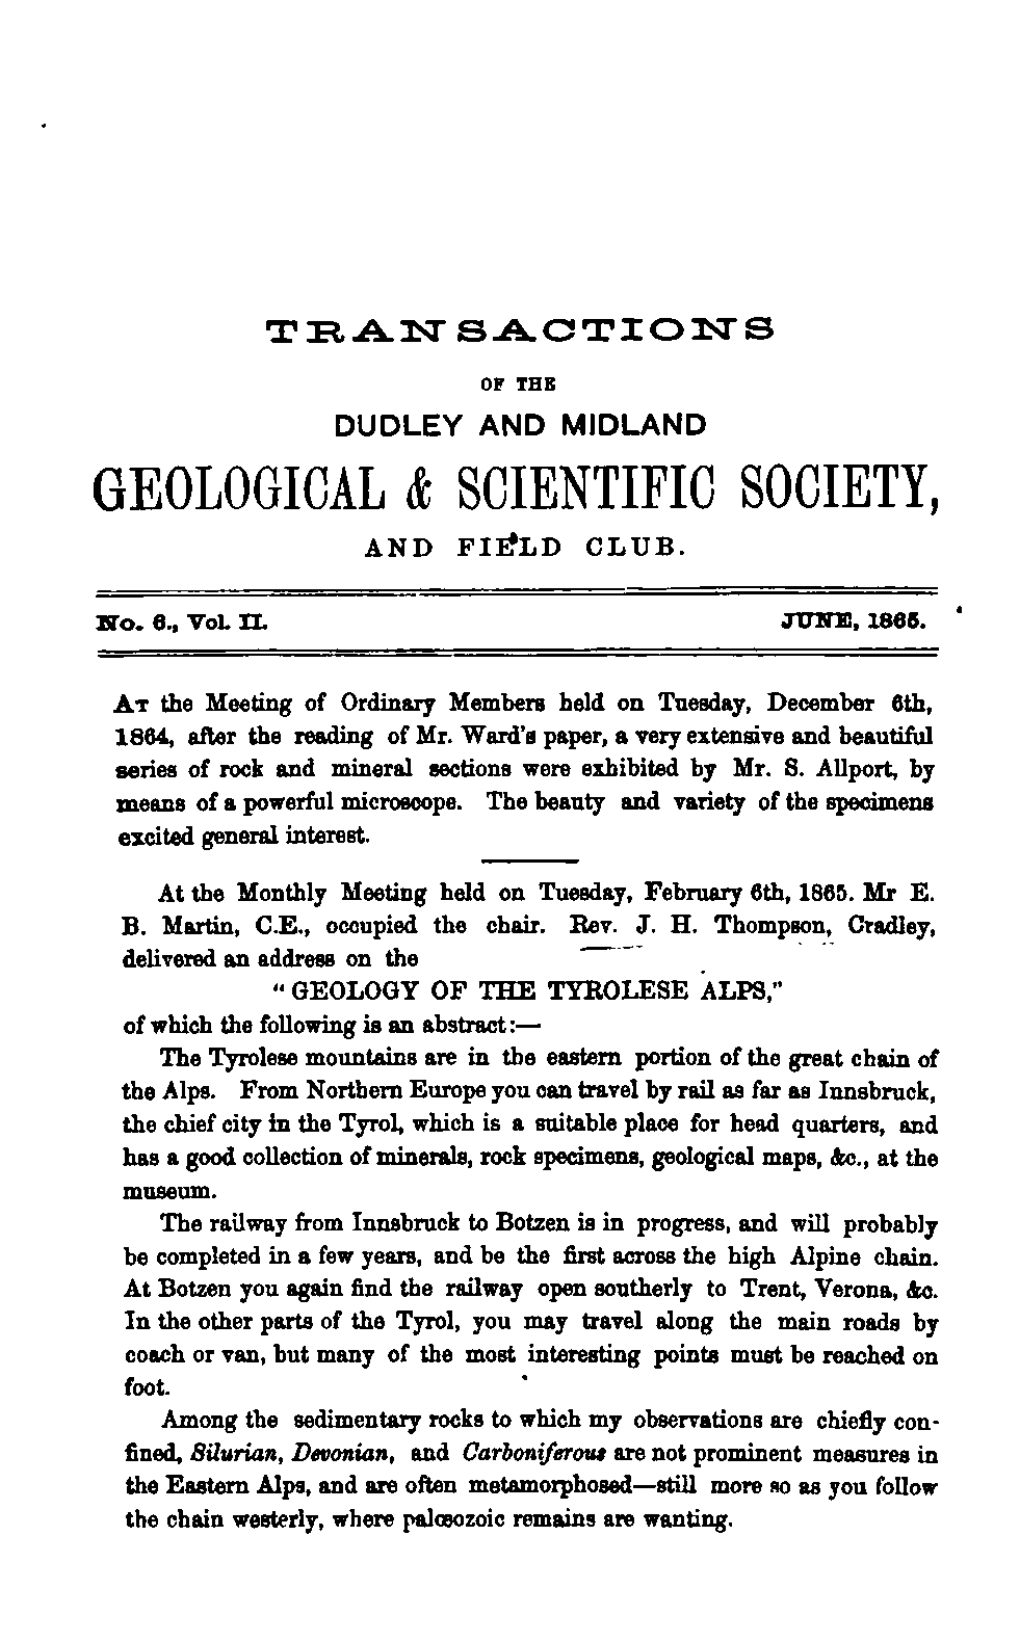 Transactions of the Dudley and Midland Geological & Scientific